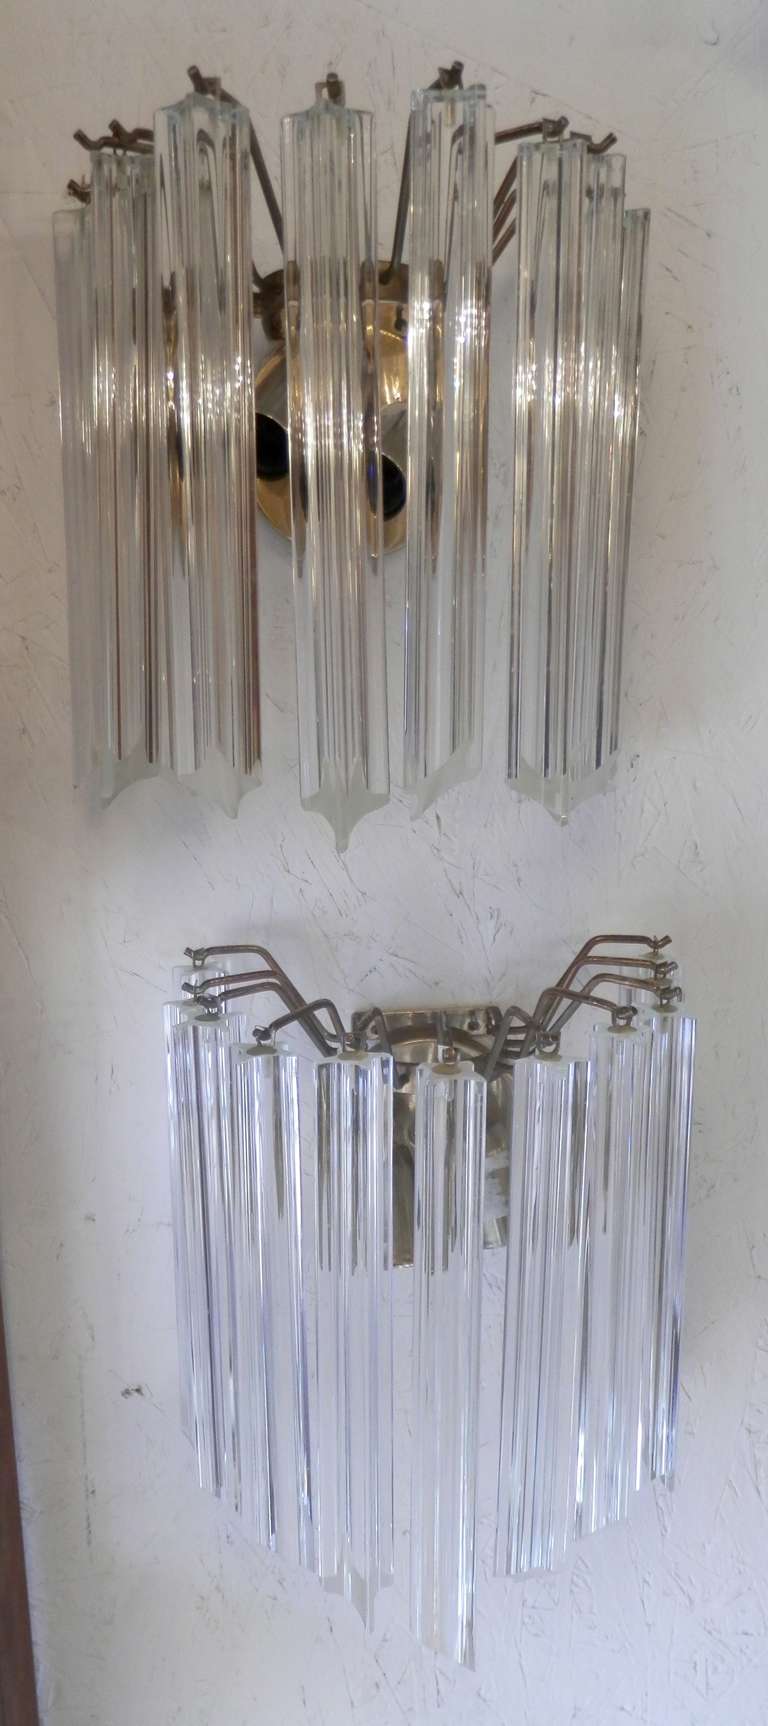 Pair of wall mounted hanging glass chandelier-style sconces with brass fitting. Takes two bulbs each with adjustable heads, wrapped in Murano style prism glass. In the style of Camer made glass sconces, but not tagged.

(Please confirm item